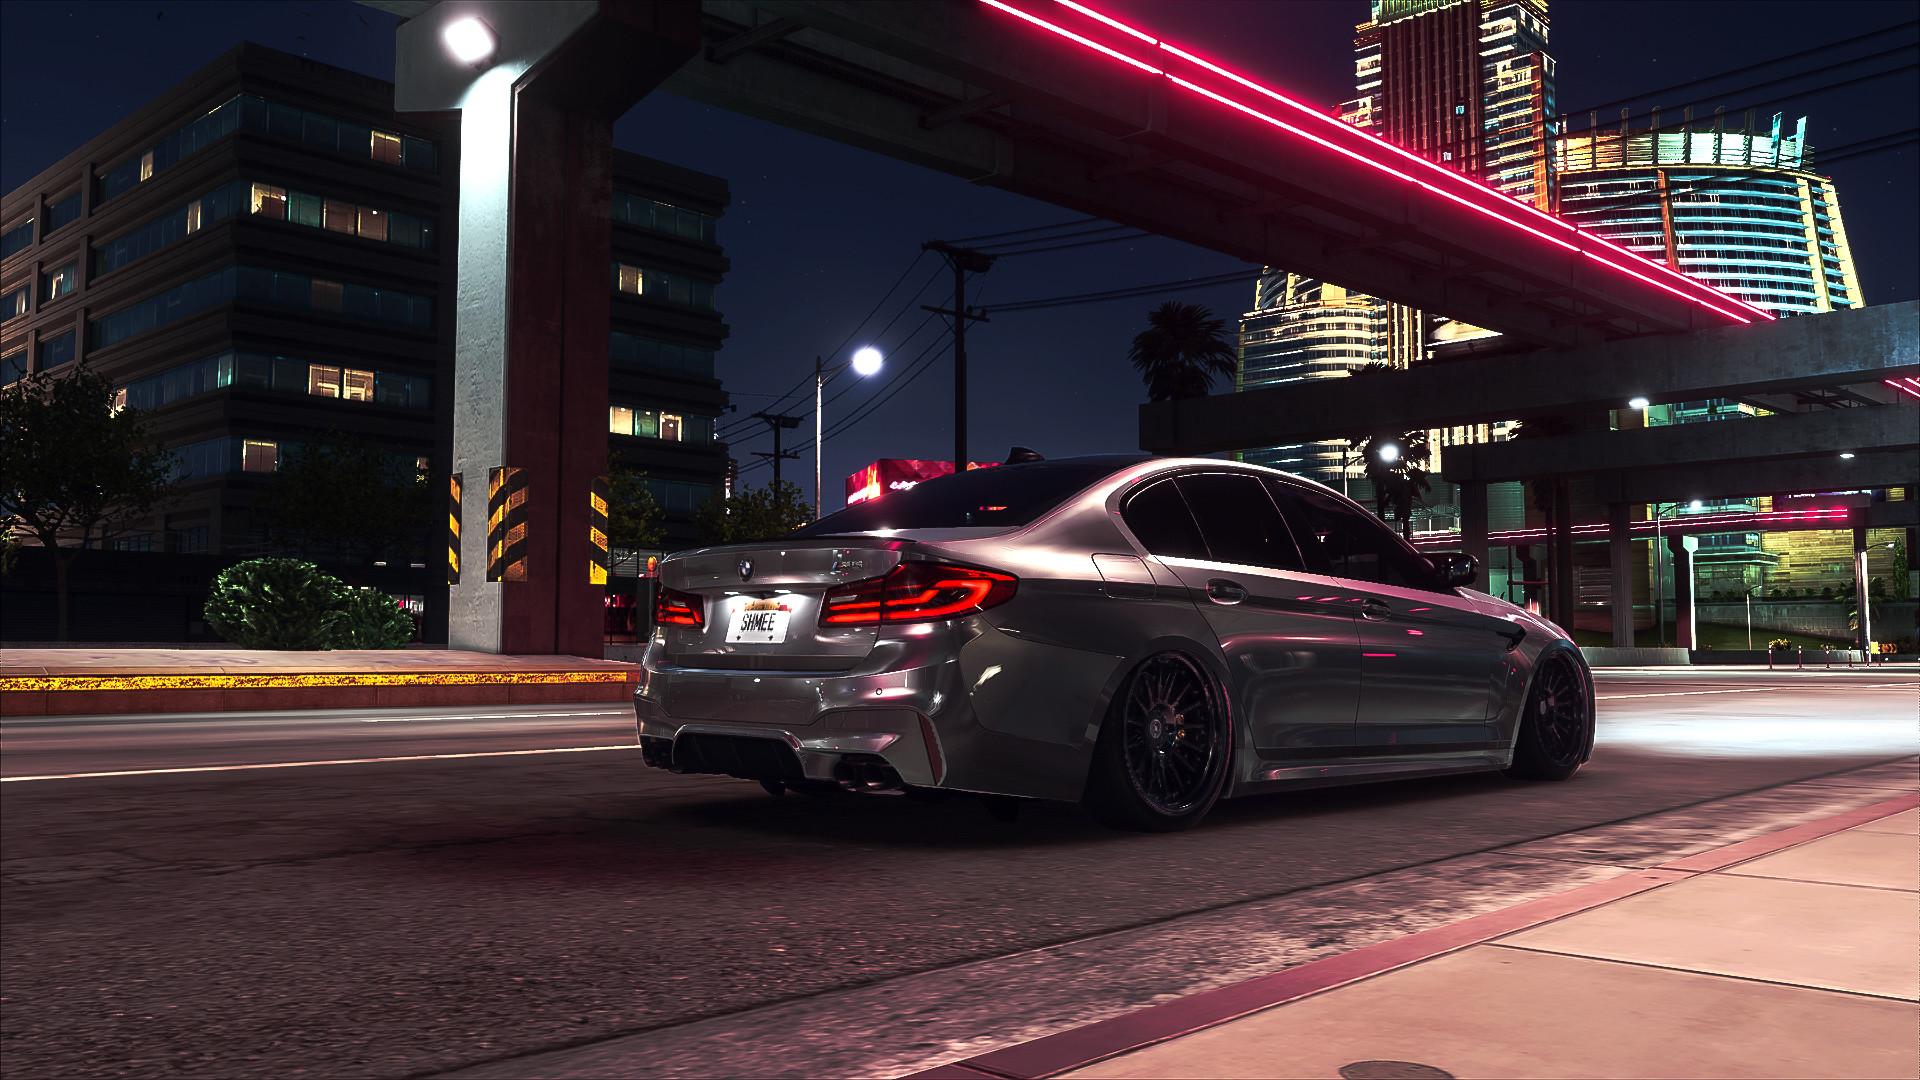 Need For Speed Payback Video Games BMW M5 2017 Wallpaper -  Resolution:1920x1080 - ID:1265673 - wallha.com